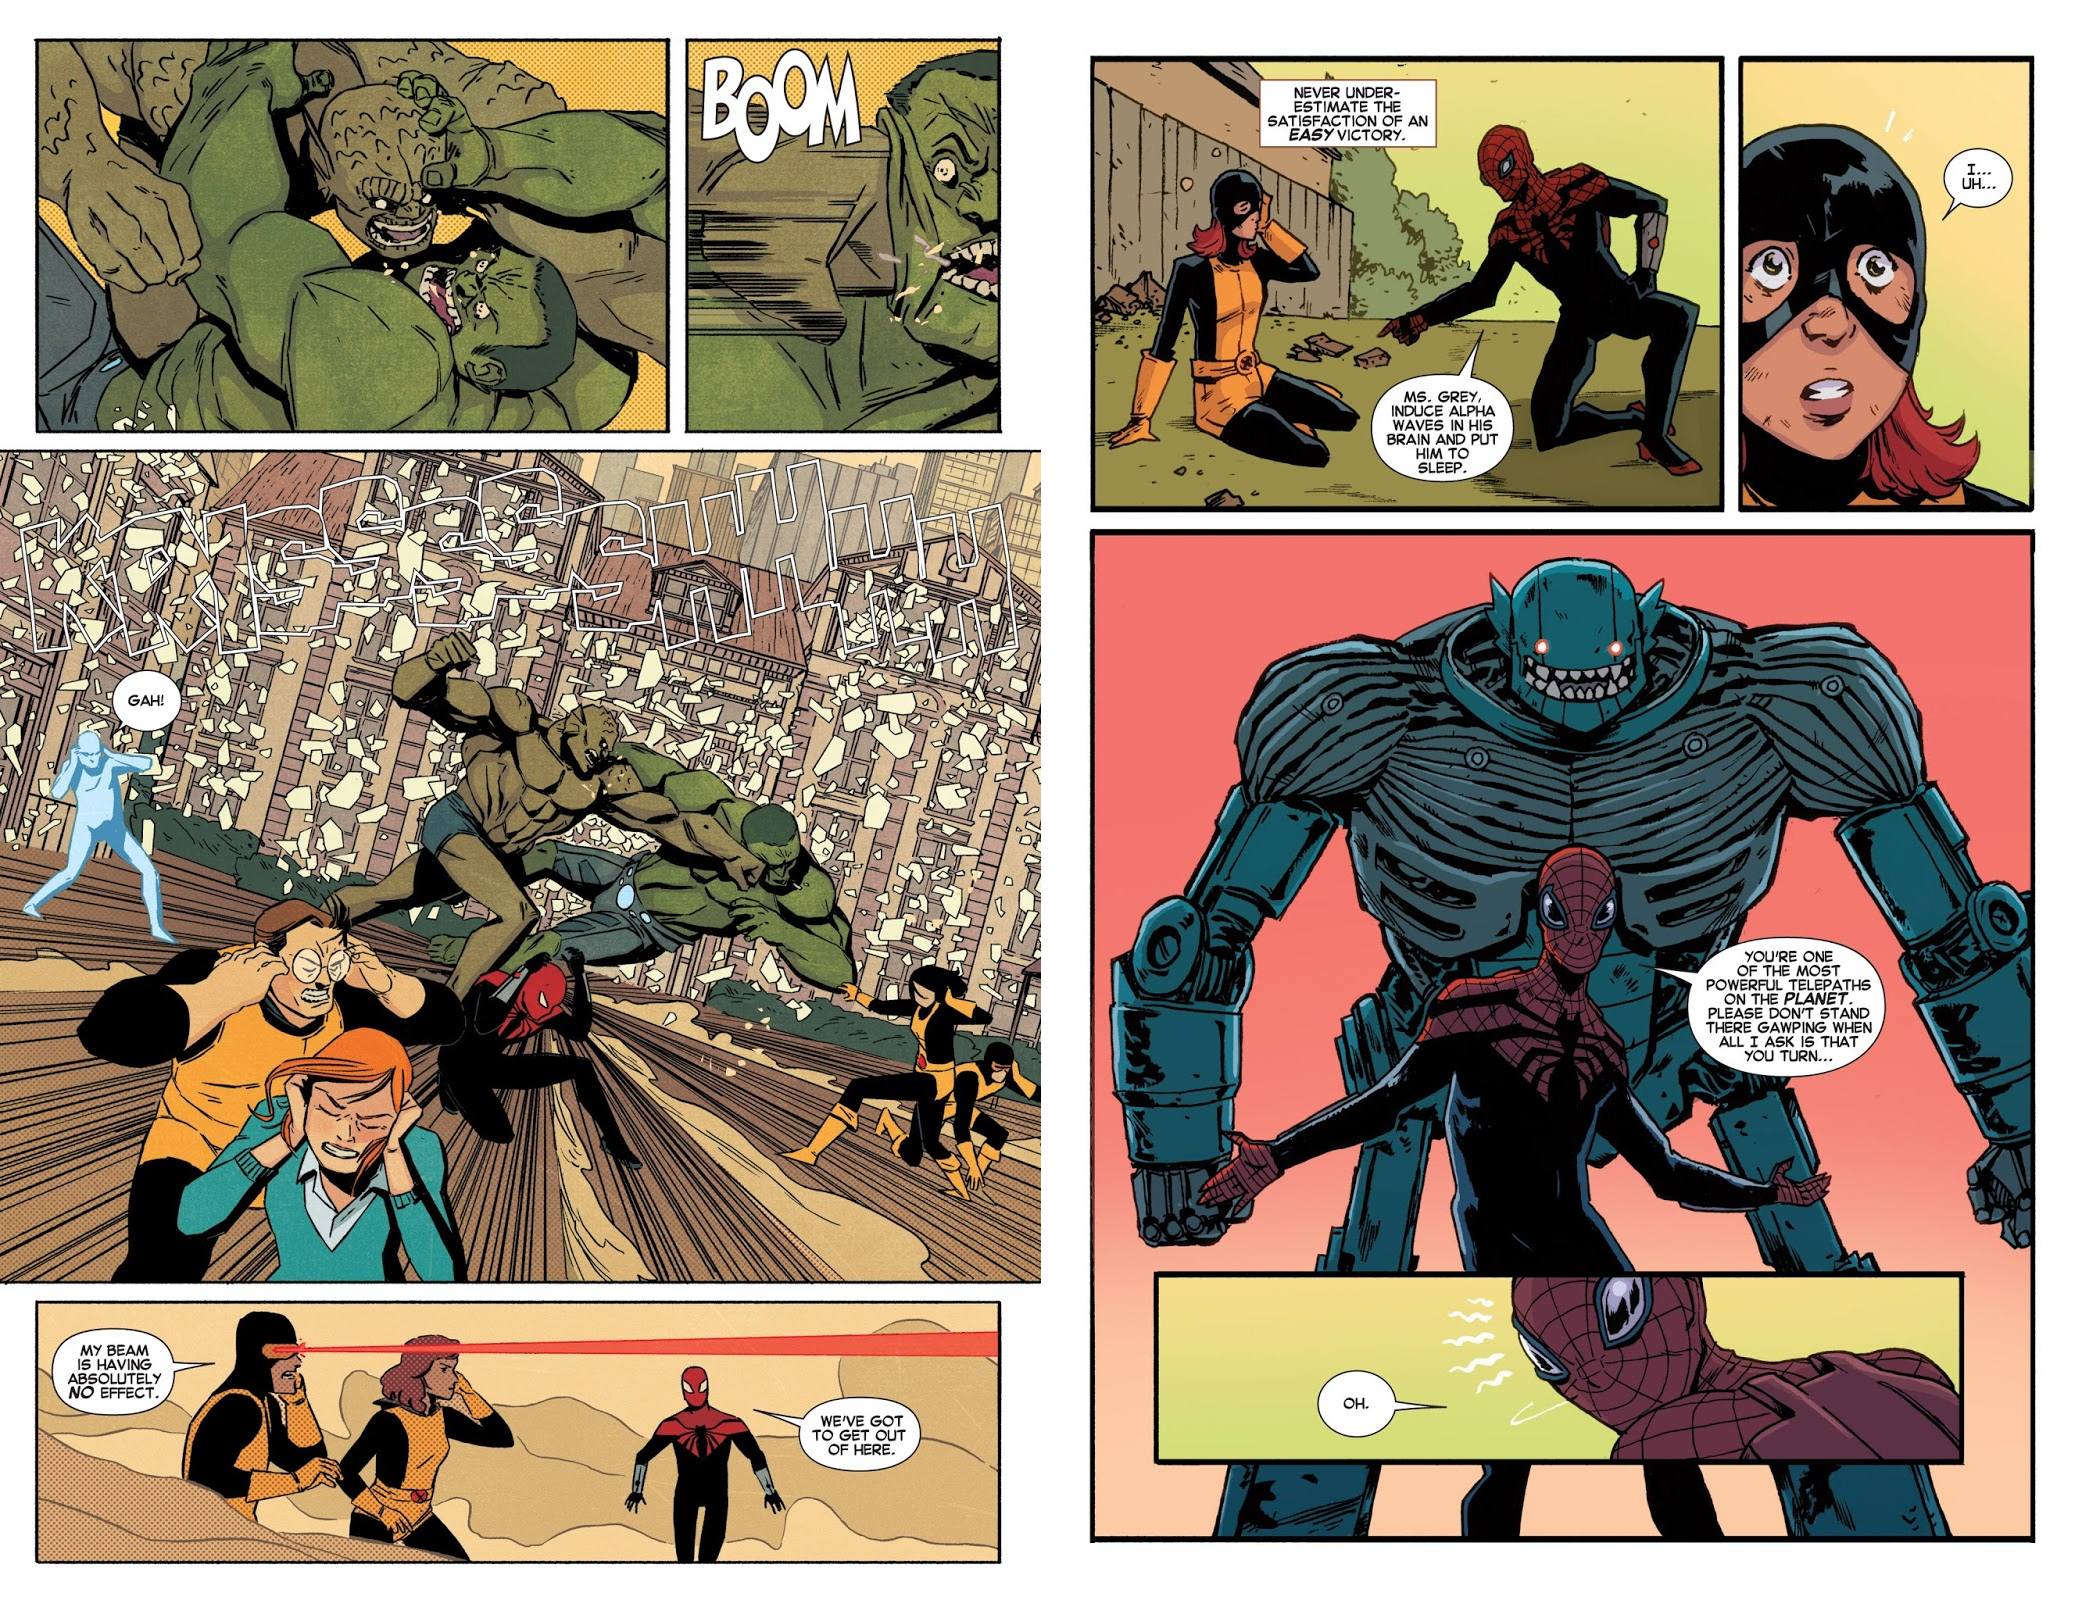 Superior Spider-Man/Indestructible Hulk/All-New X-Men: The Arms of the Octopus review